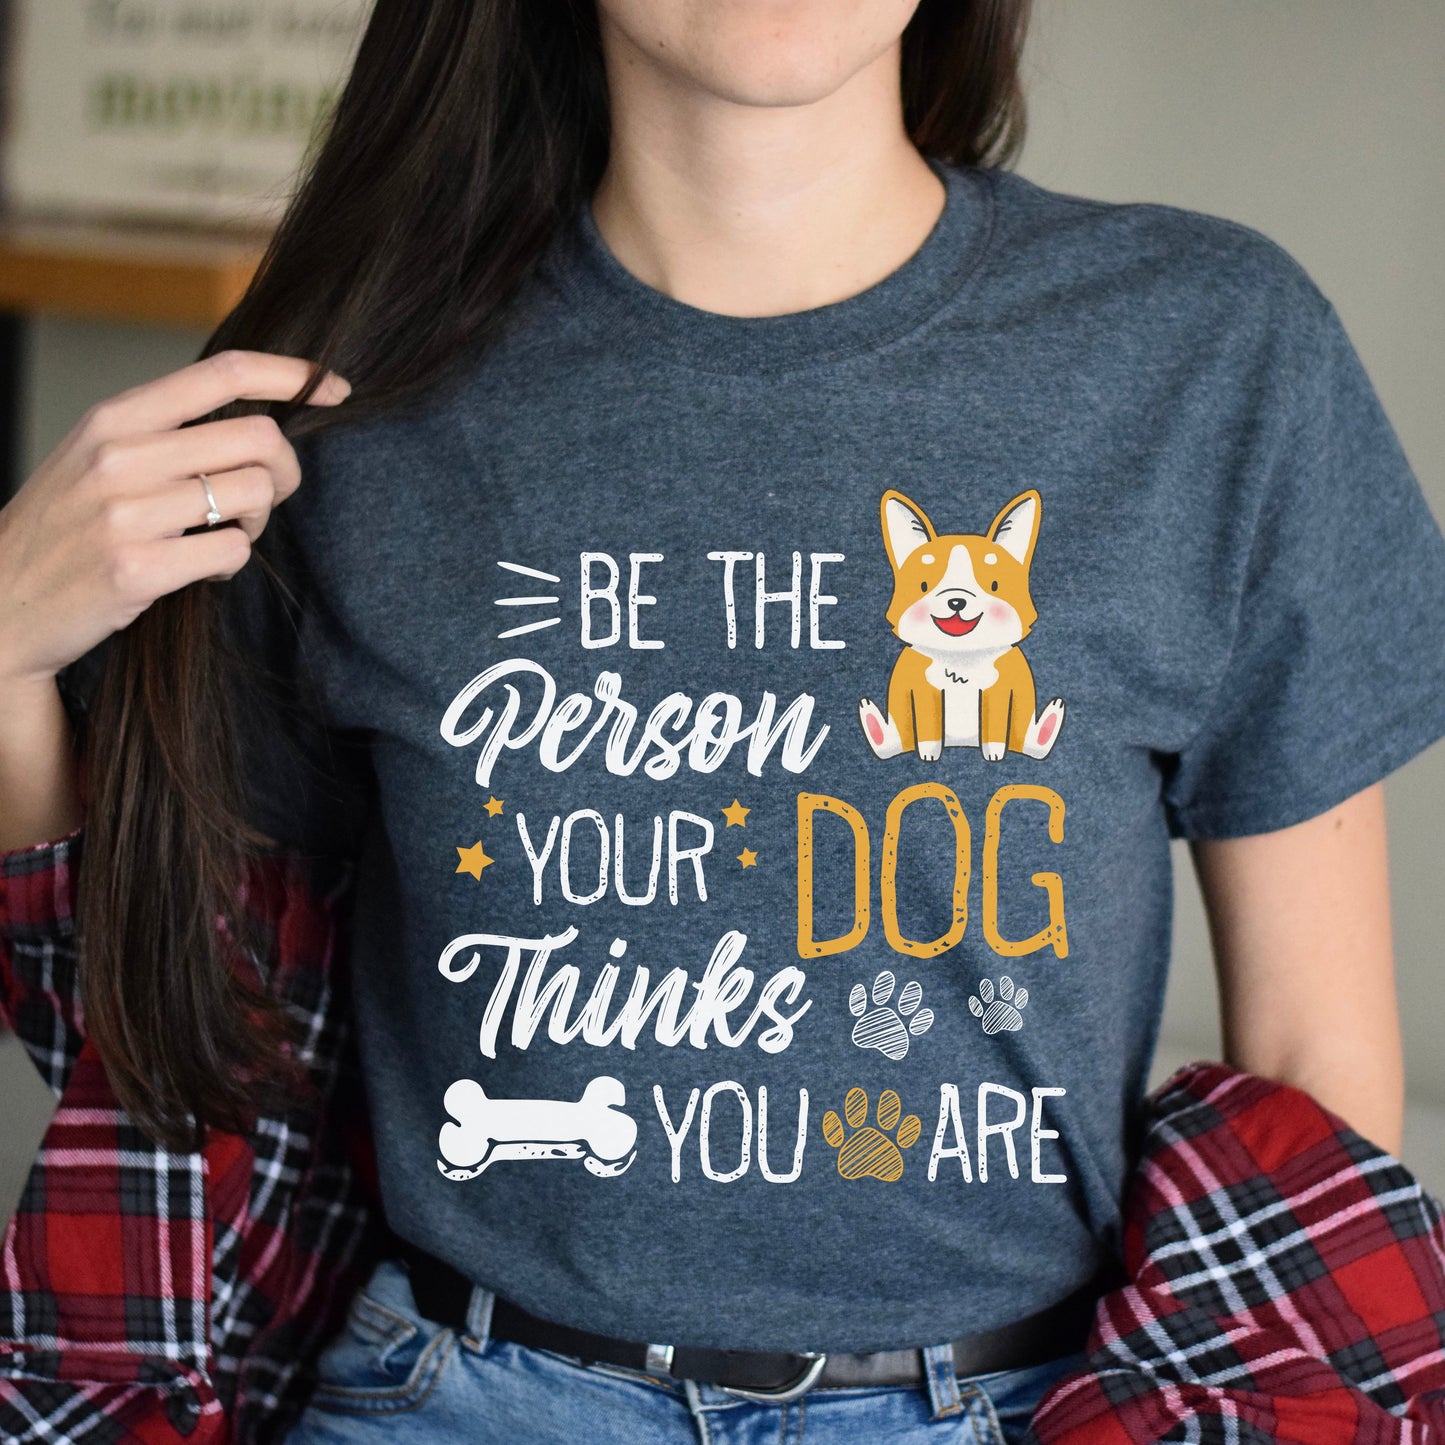 Be the person your dog thinks you are Unisex t-shirt gift black navy dark heather-Dark Heather-Family-Gift-Planet